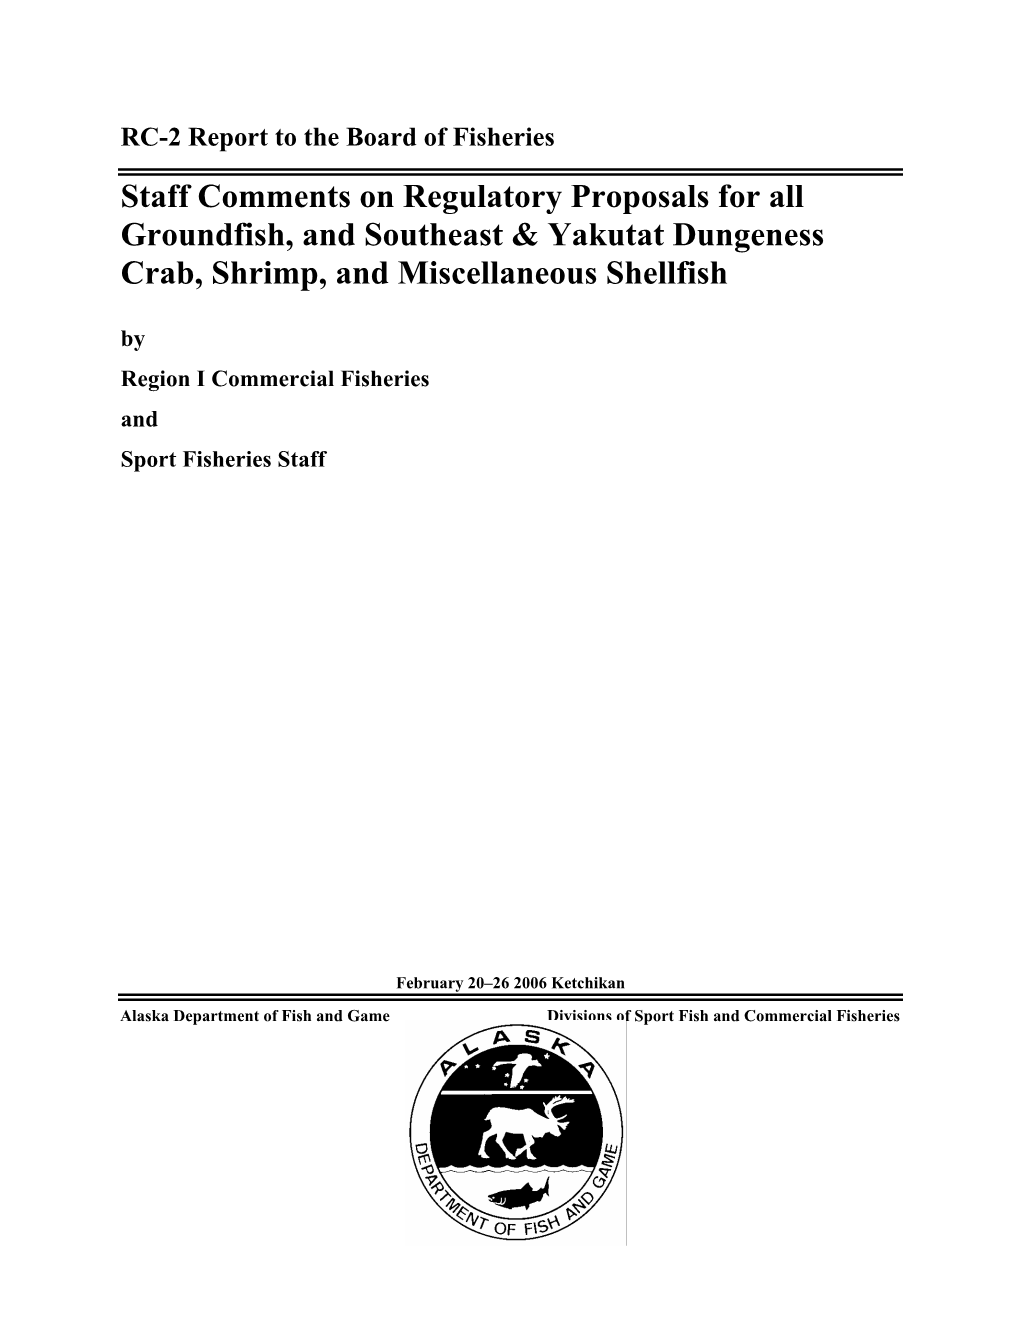 Staff Comments on Regulatory Proposals for All Groundfish, and Southeast & Yakutat Dungeness Crab, Shrimp, and Miscellaneous